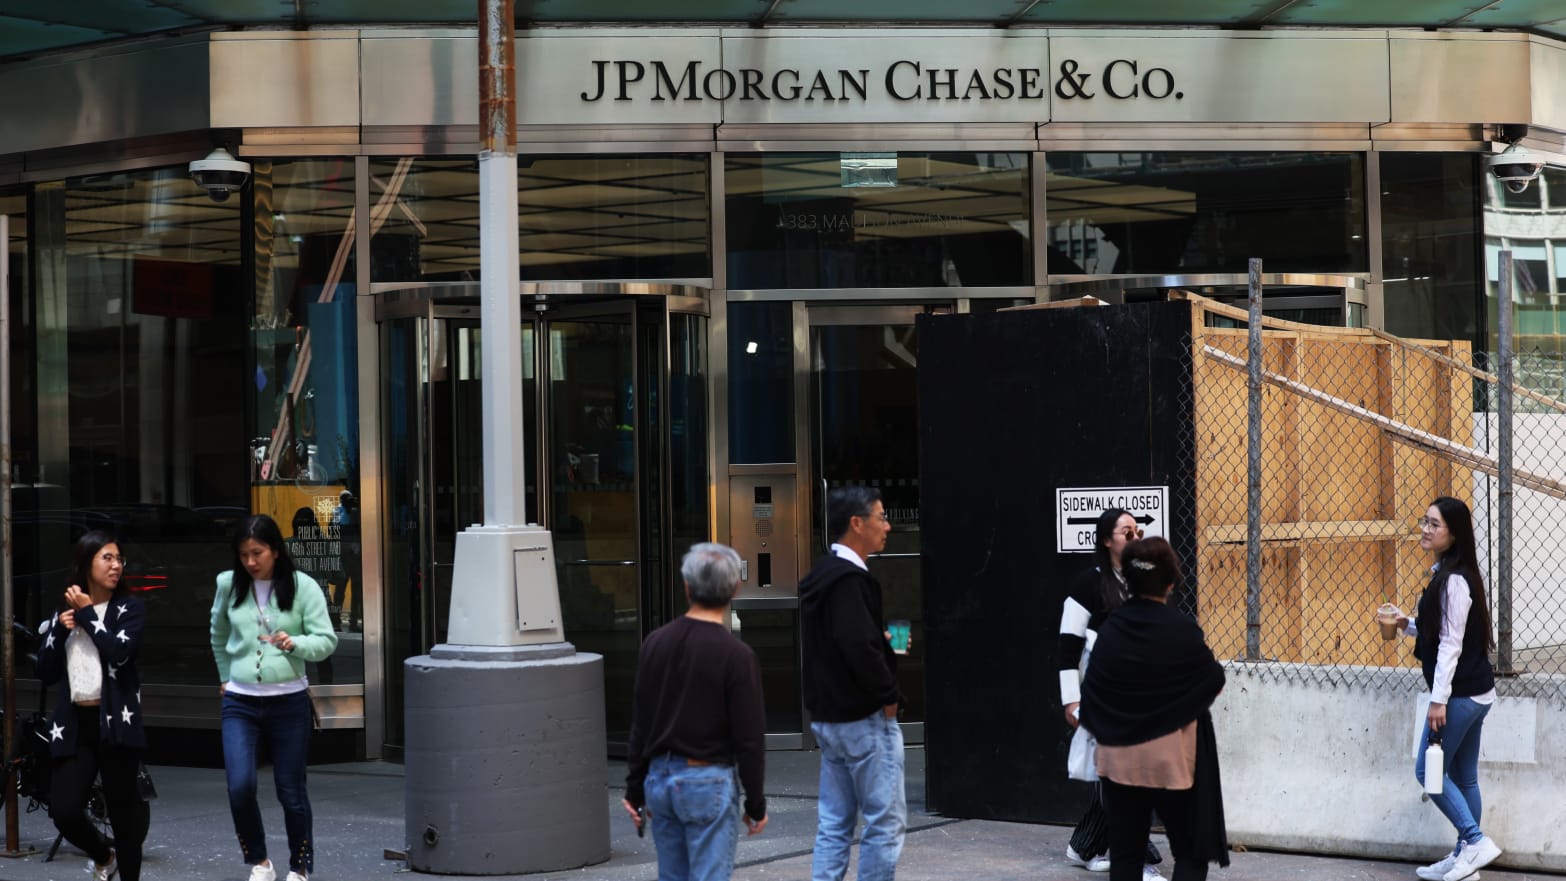 The U.S. Virgin Islands government is seeking at least $190 million in penalties from JPMorgan Chase.